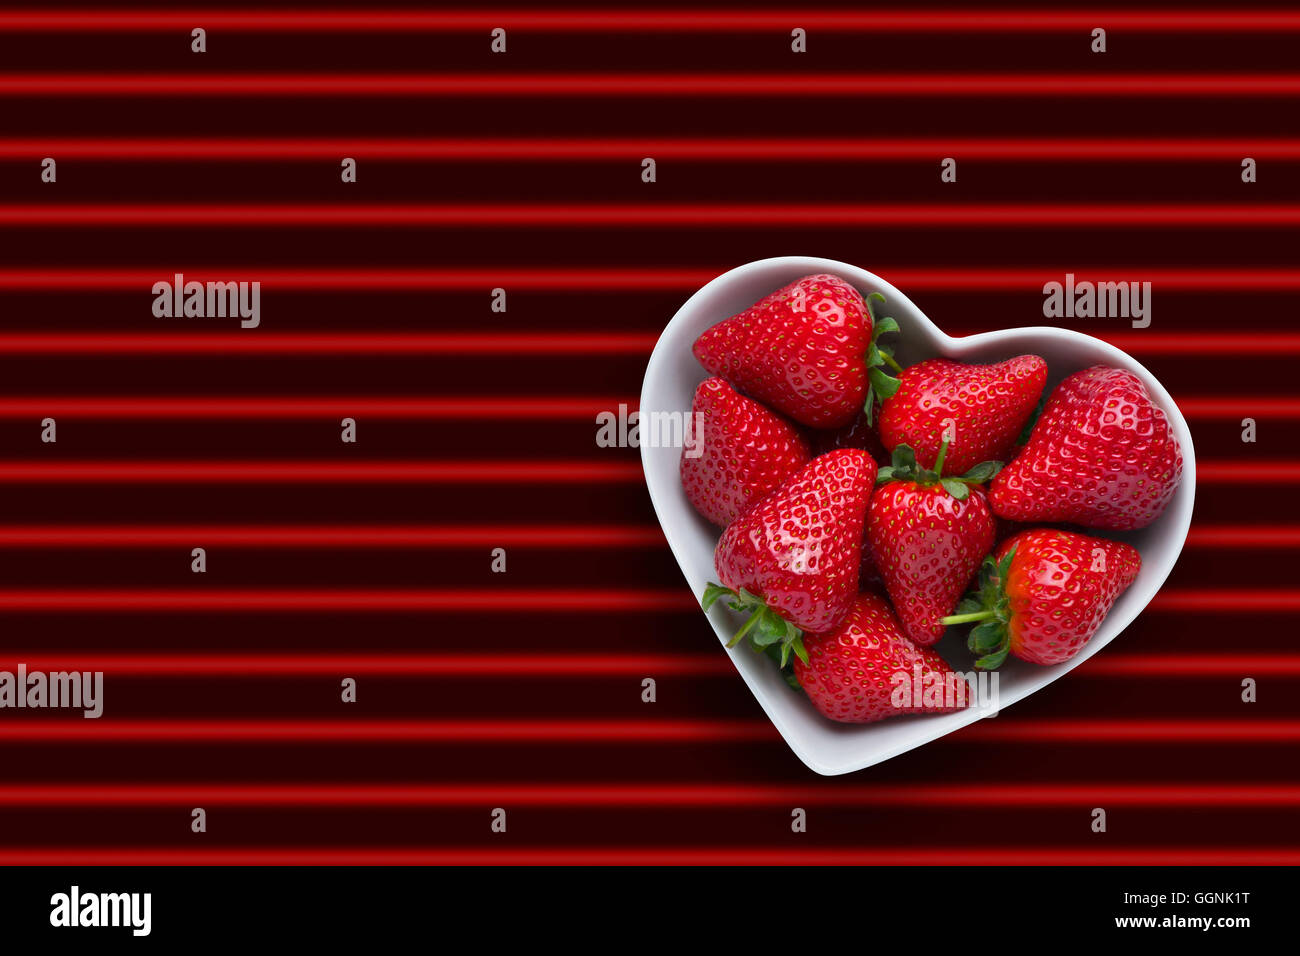 Strawberries in heart-shape bowl on red striped background Stock Photo